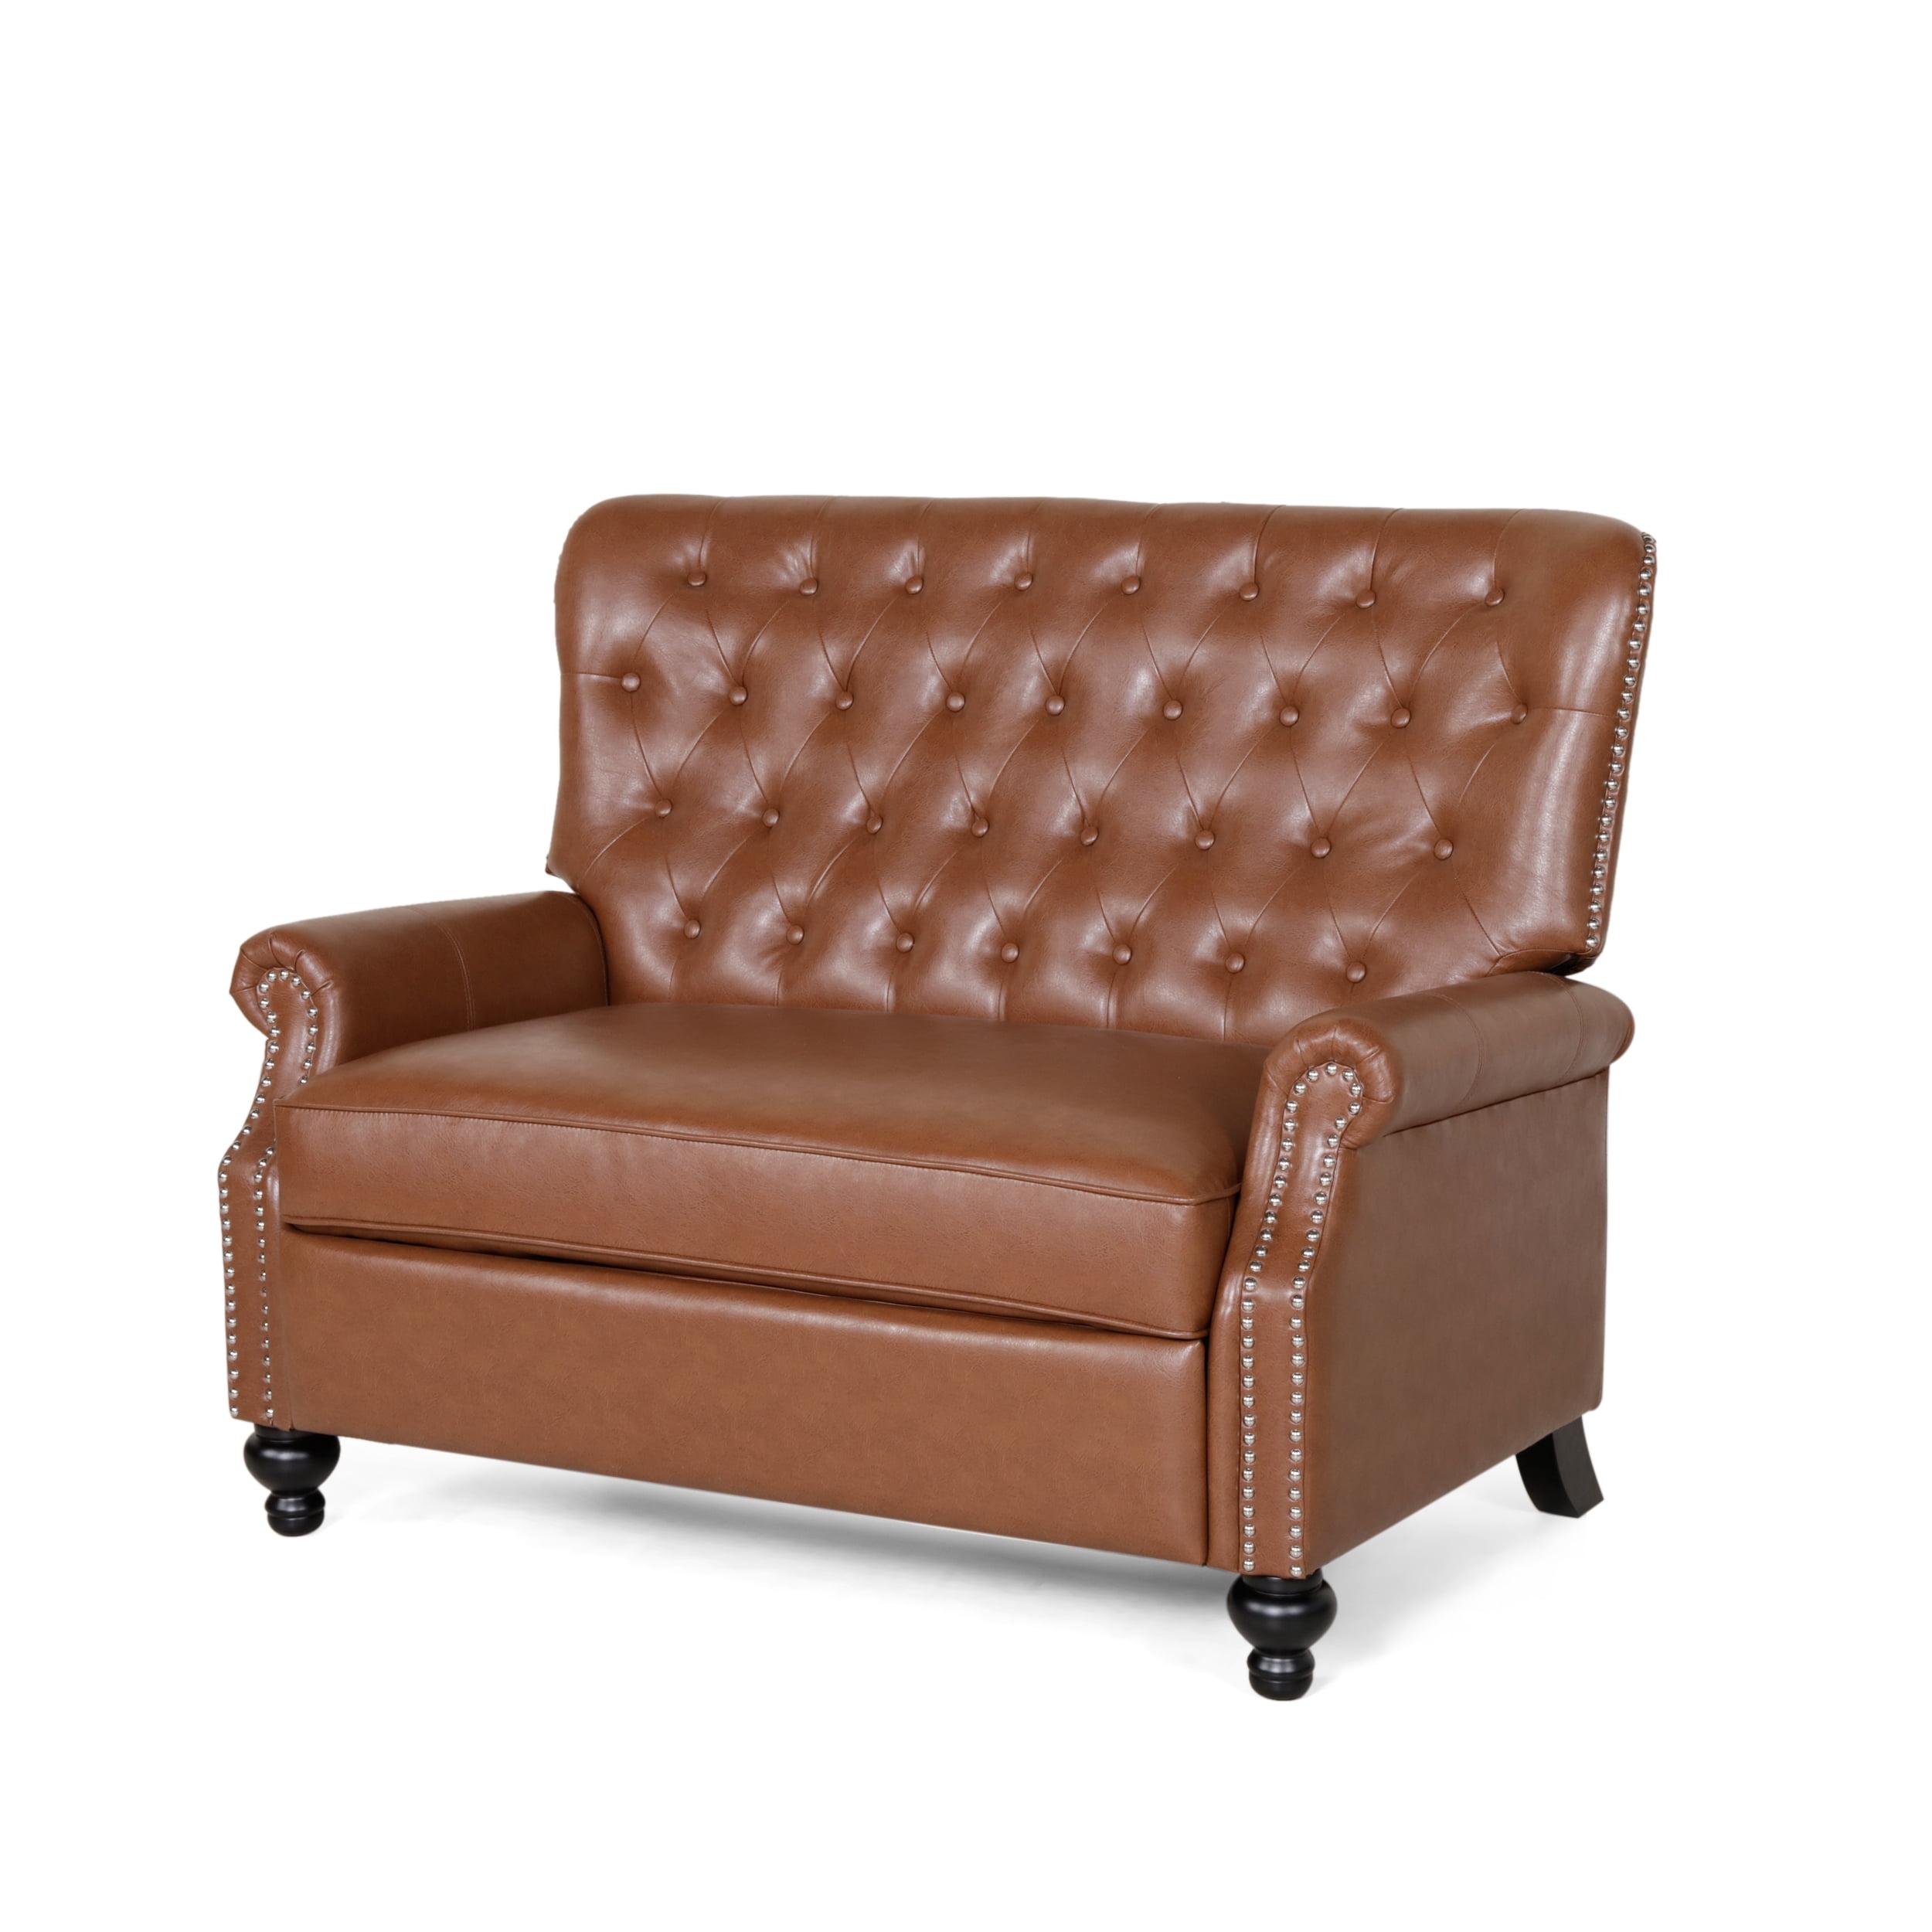 Cognac Brown Faux Leather Handcrafted Club Recliner with Wood Frame